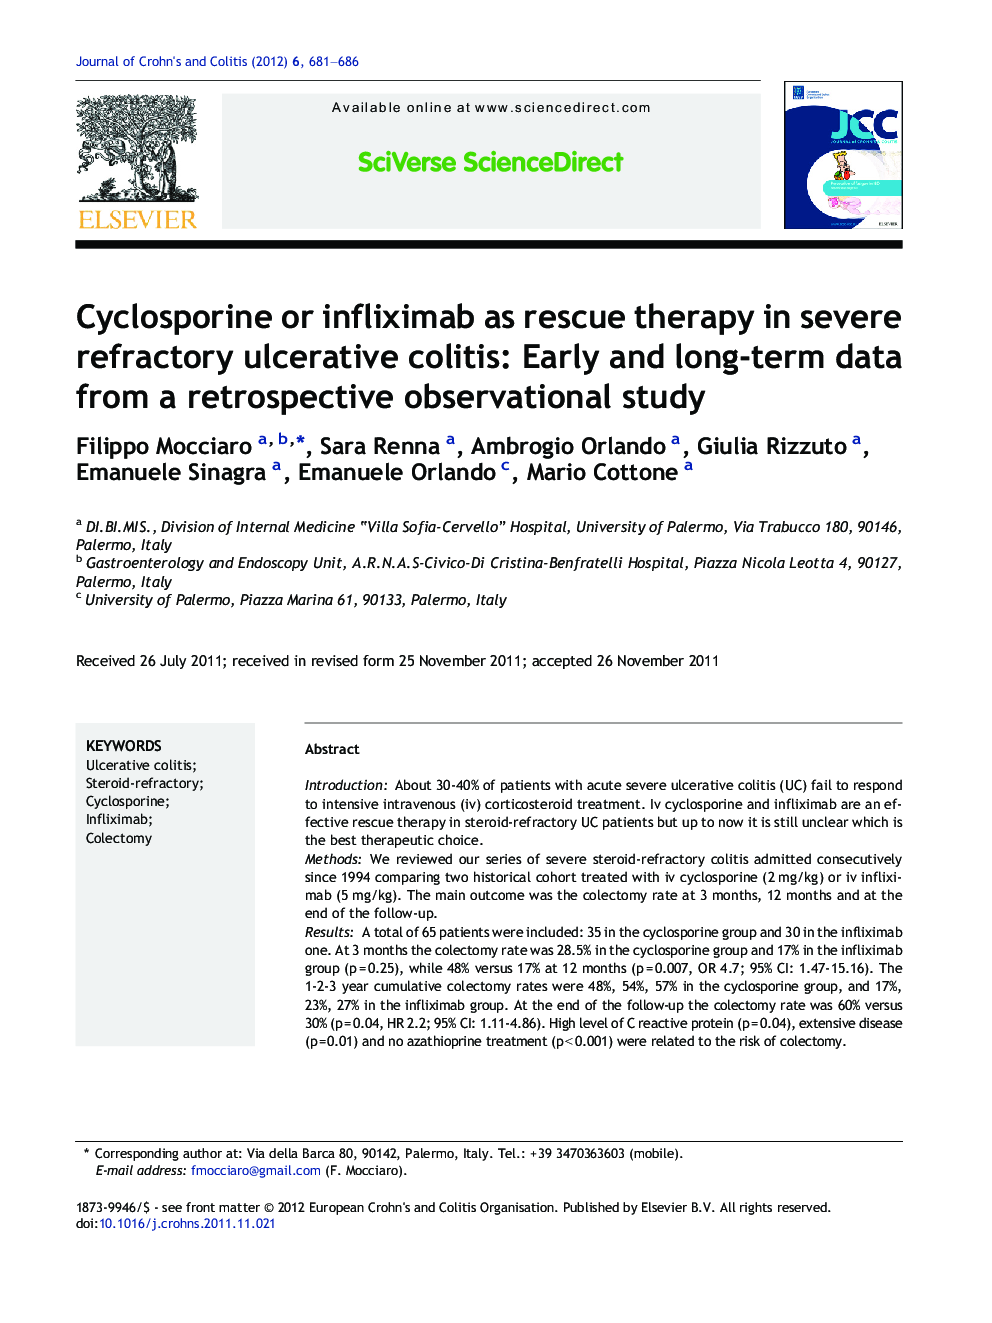 Cyclosporine or infliximab as rescue therapy in severe refractory ulcerative colitis: Early and long-term data from a retrospective observational study